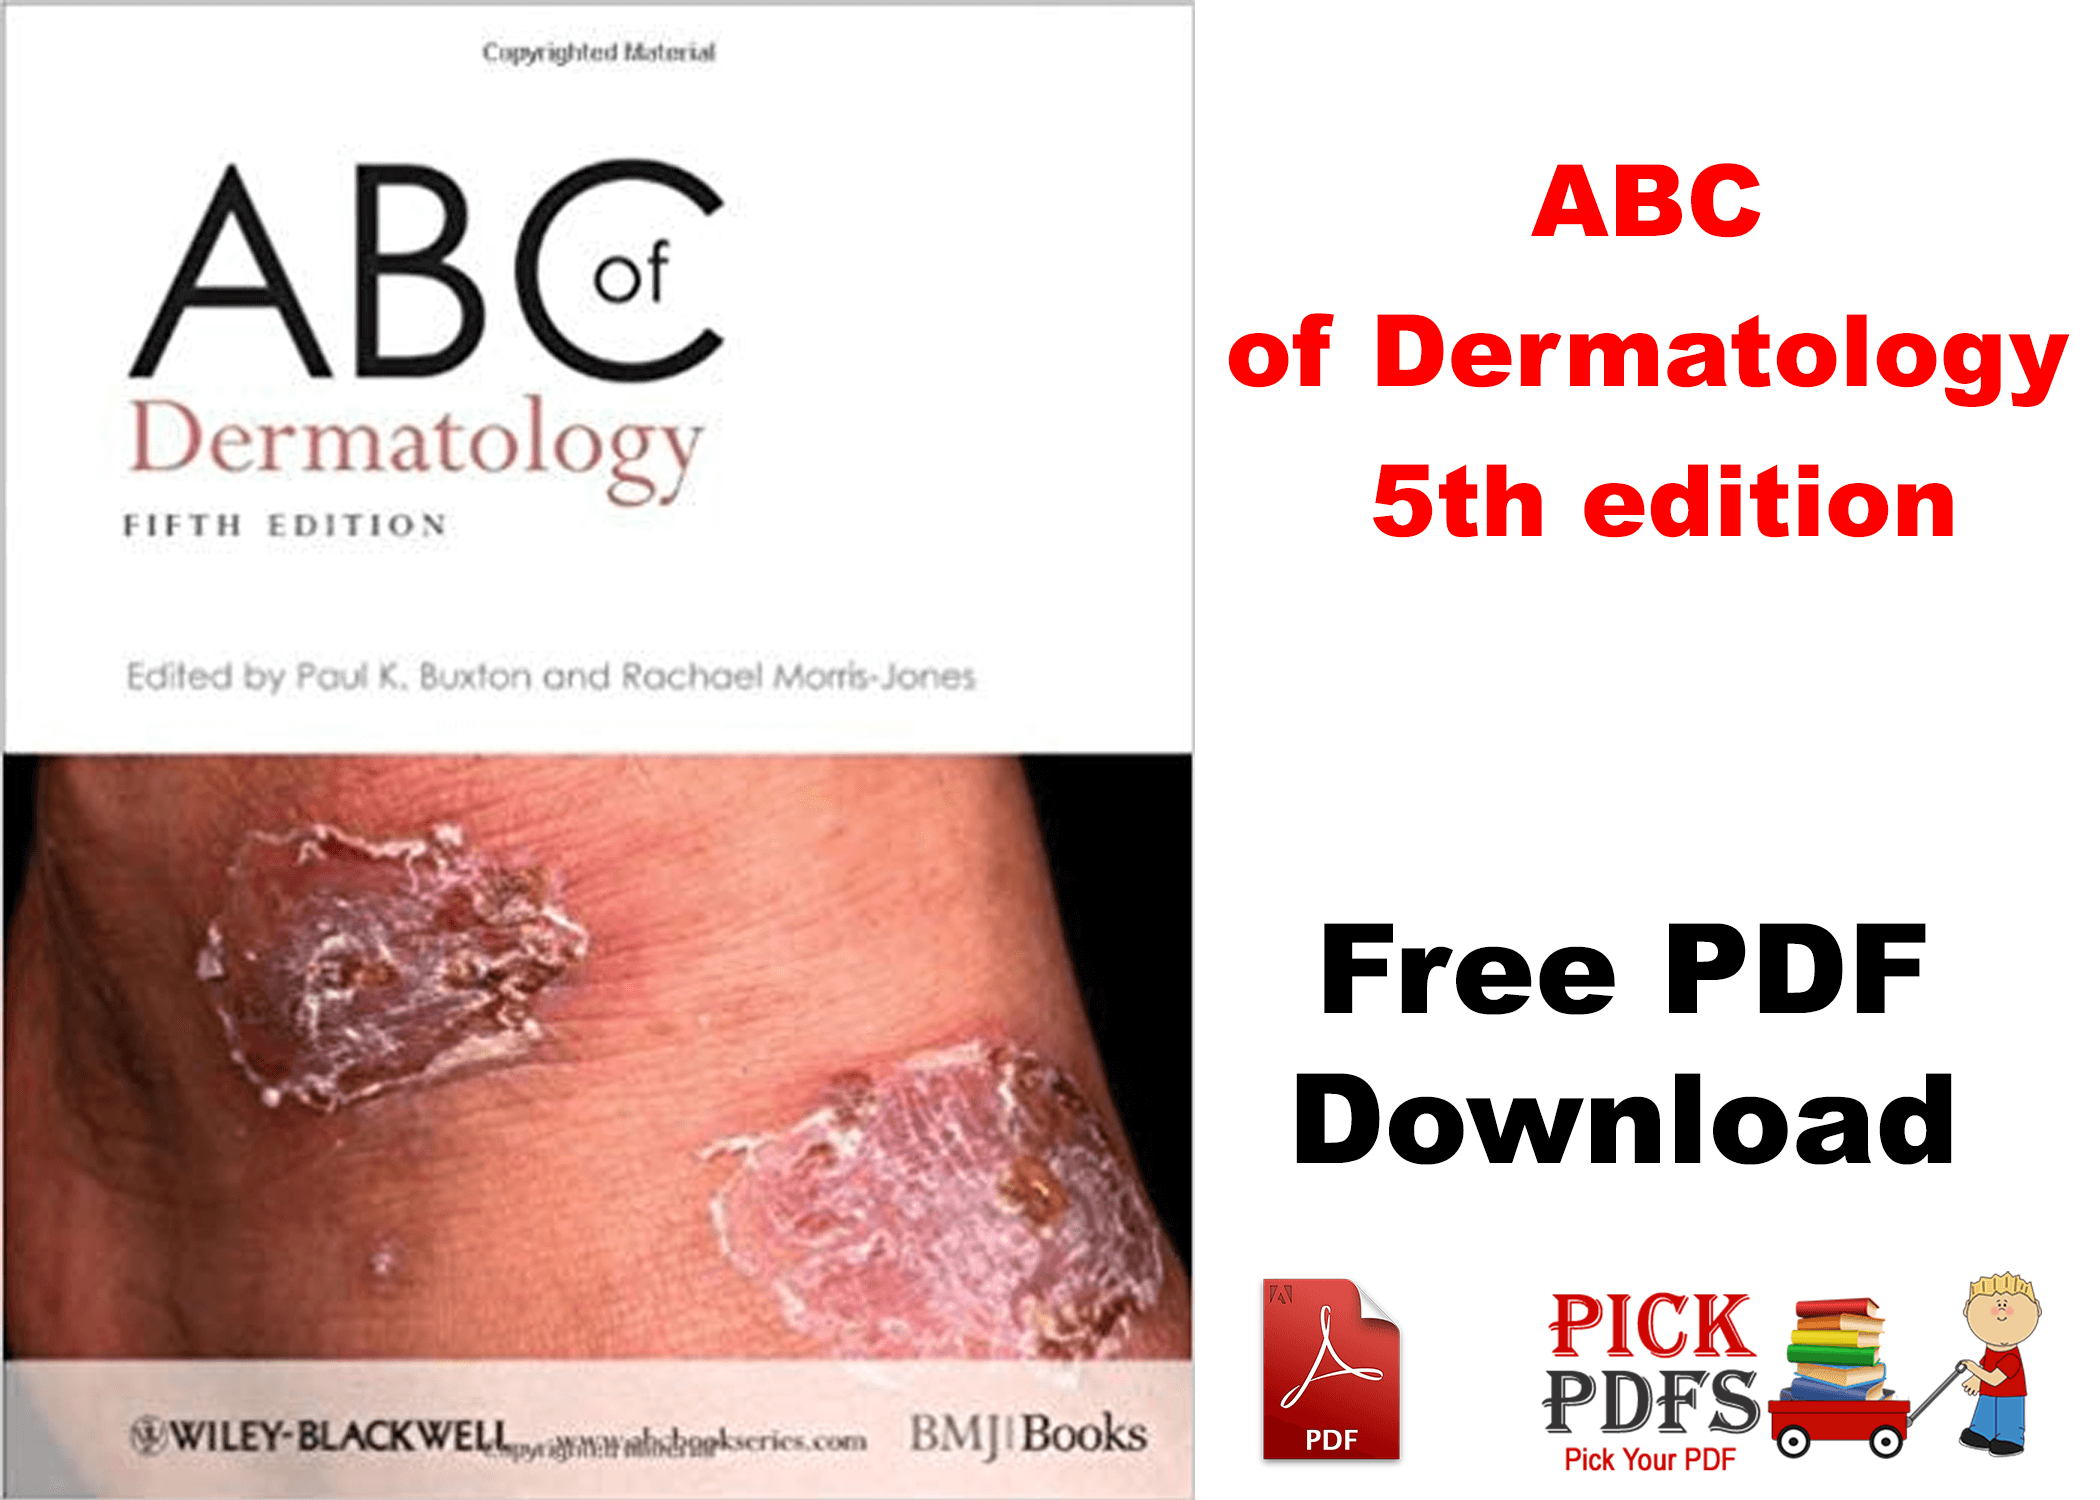 https://pickpdfs.com/abc-of-dermatology-5th-edition-free-pdf-download-ebook/